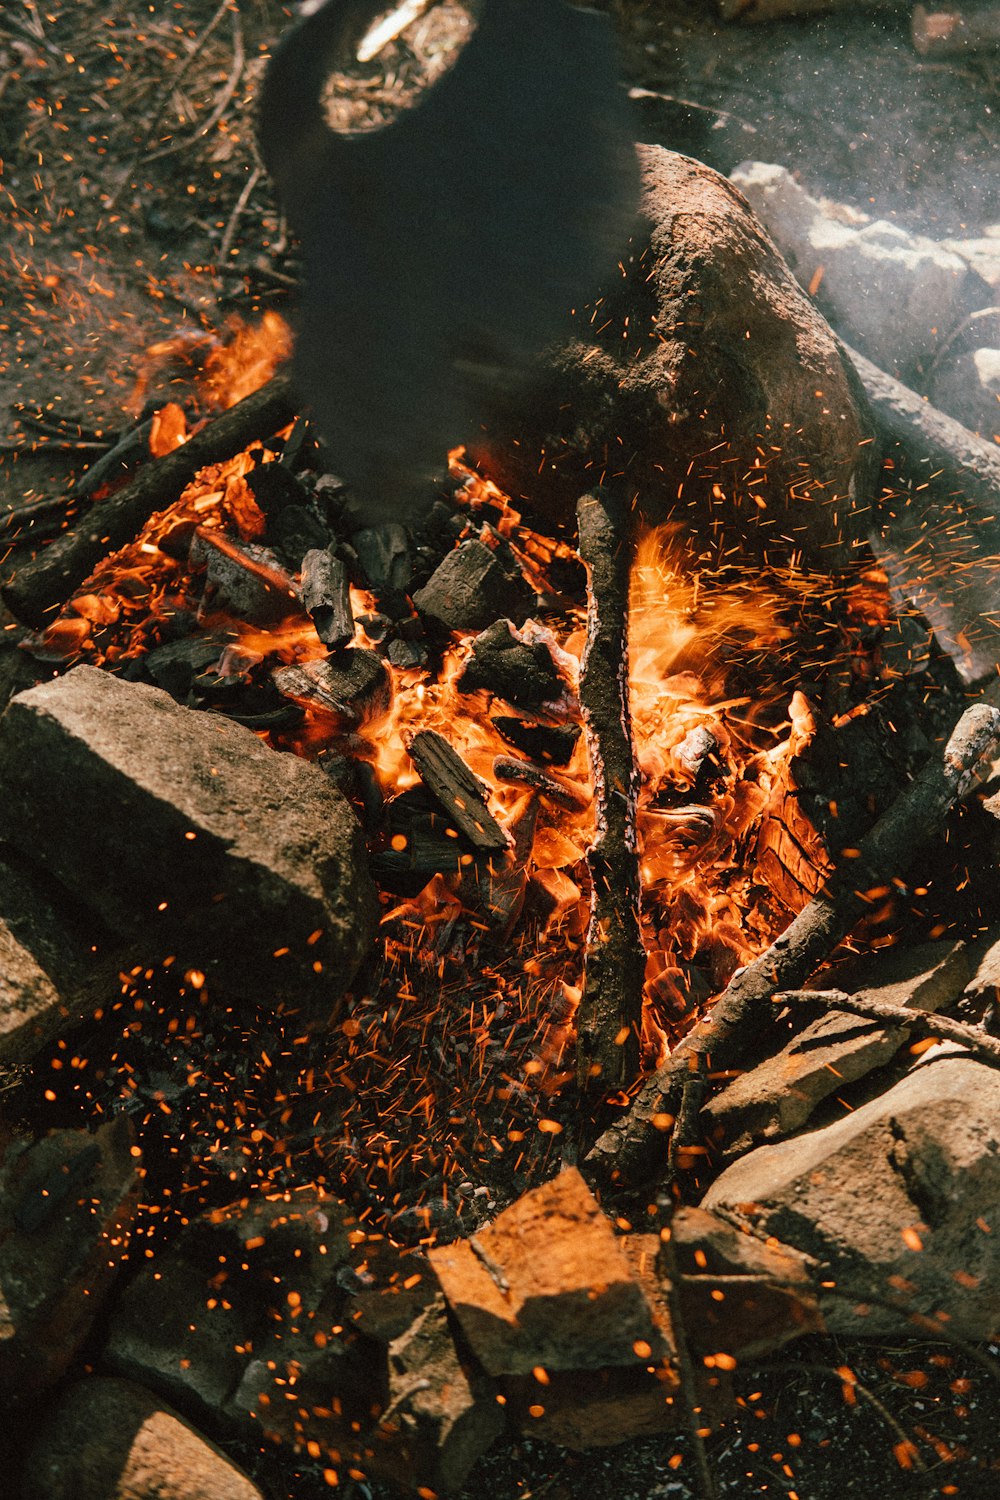 a fire burning in a pit